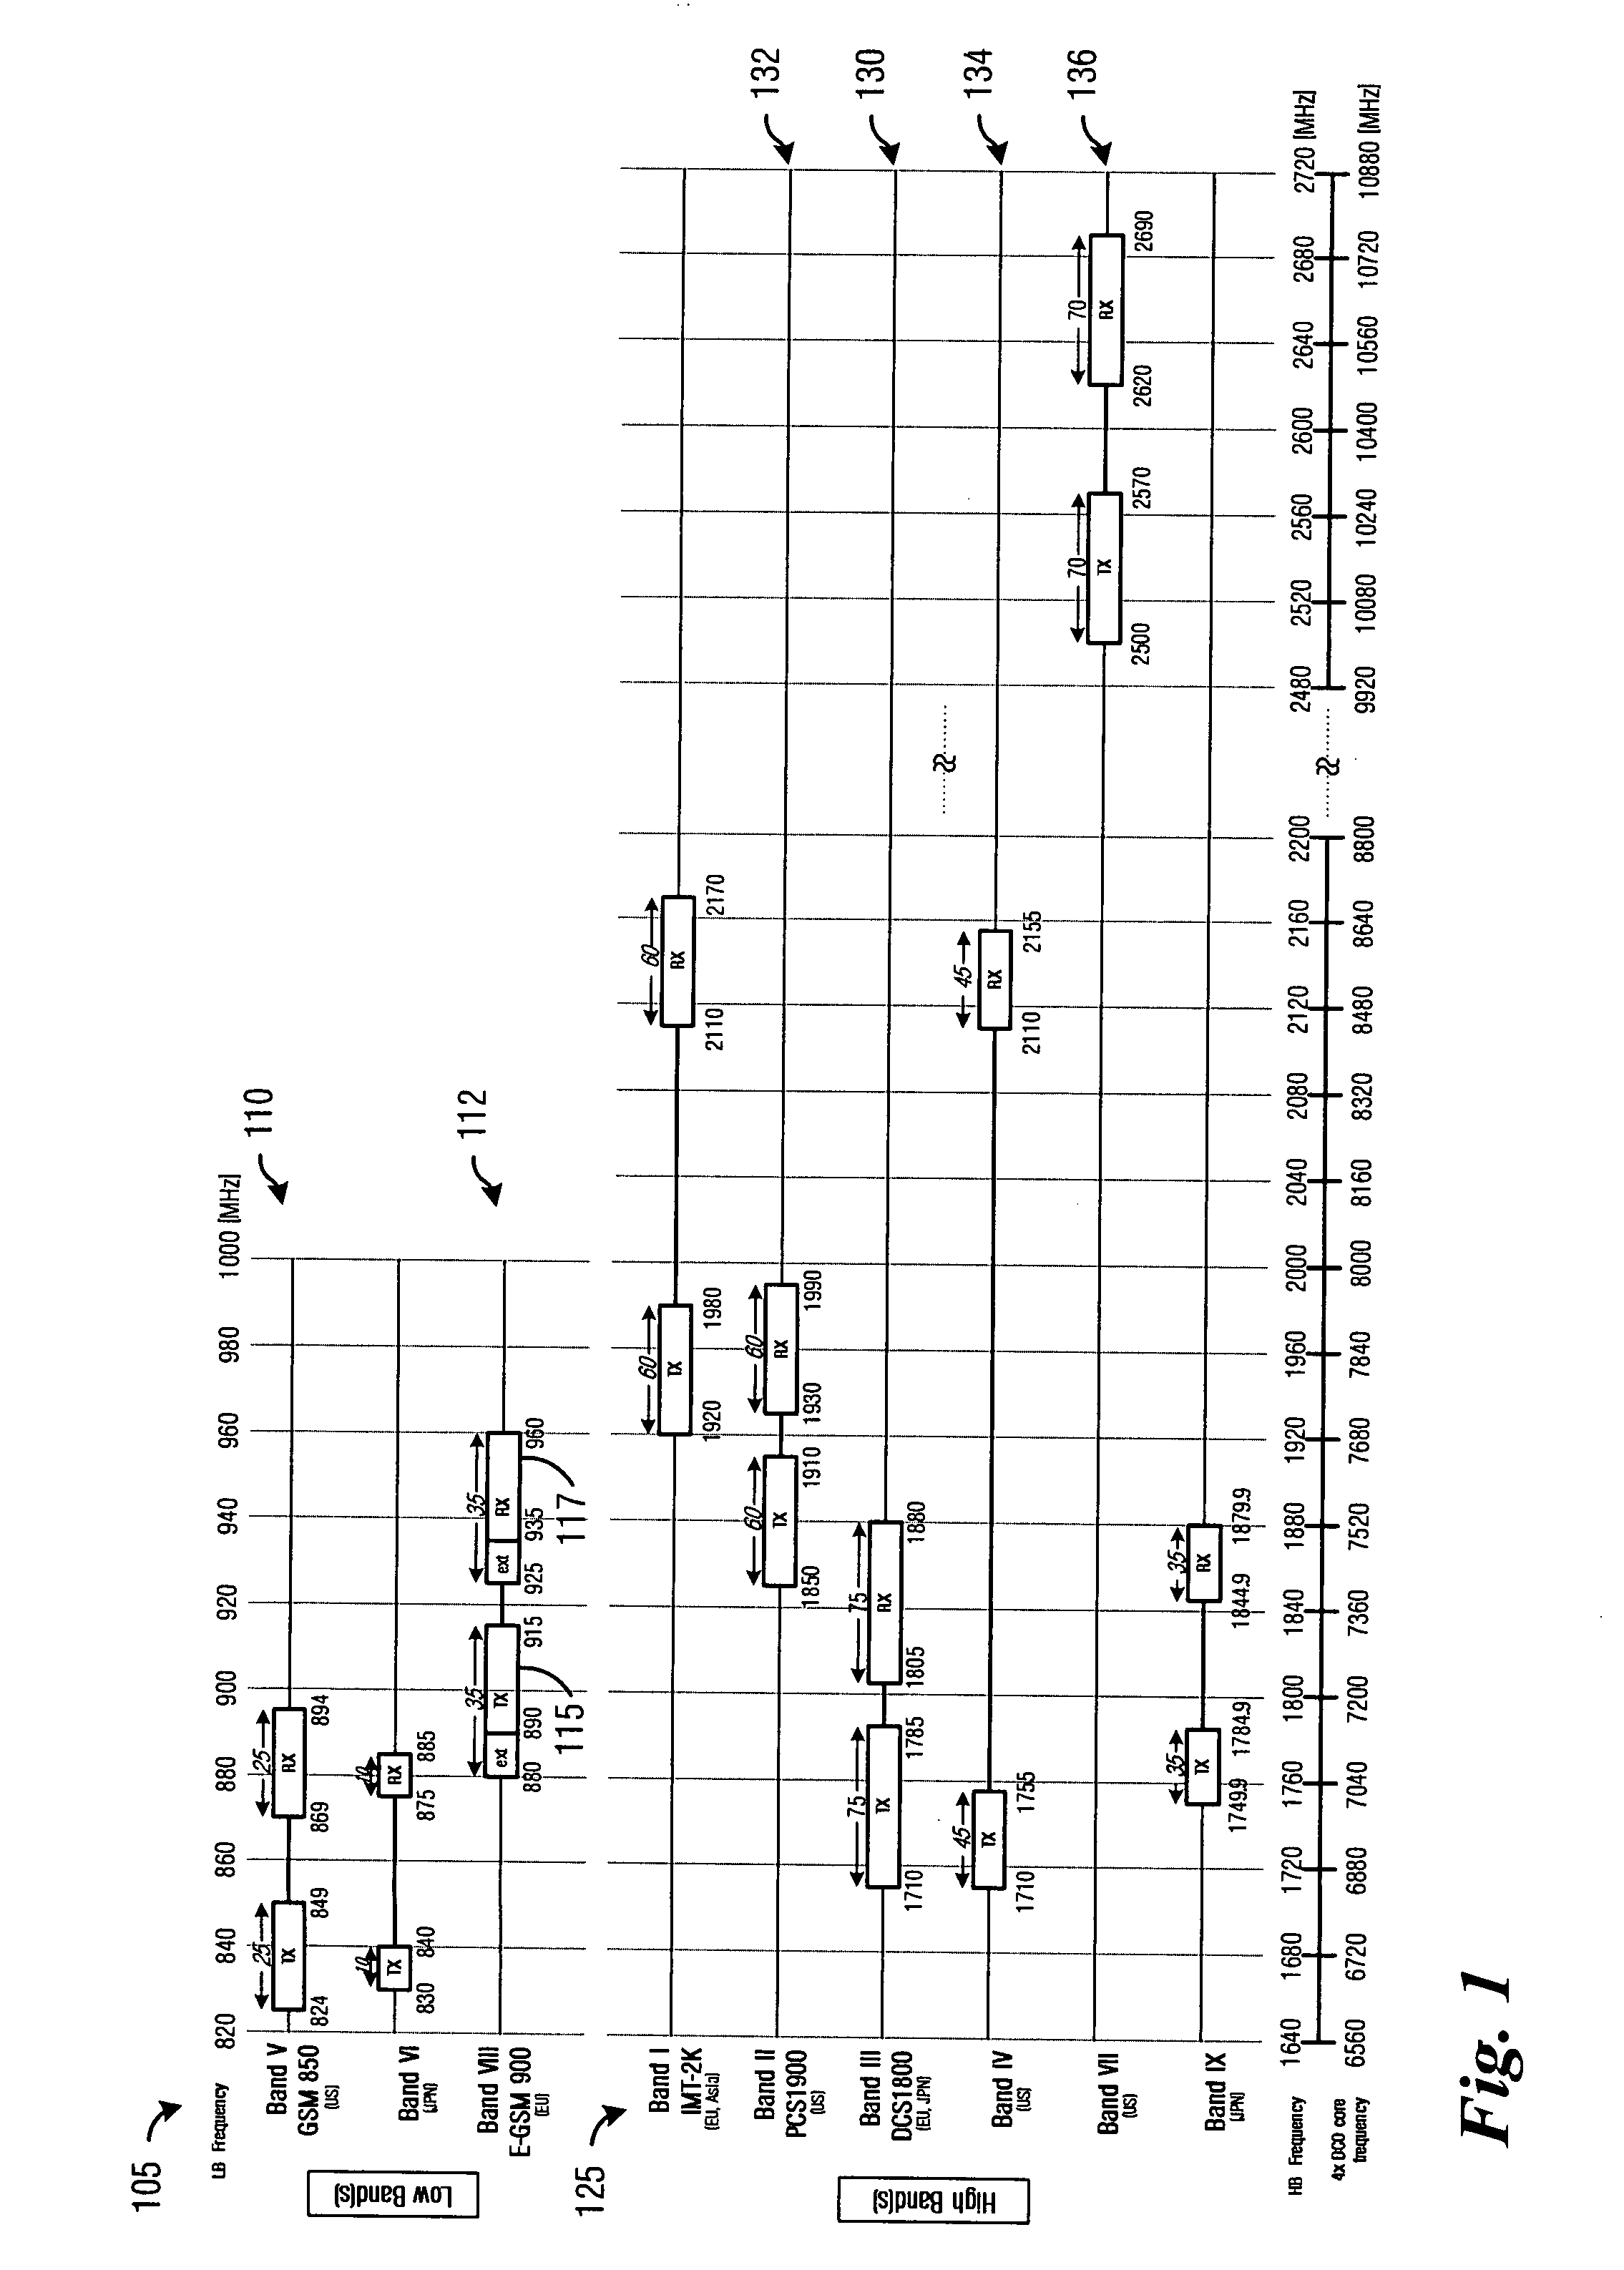 System and method for increasing frequency tuning range